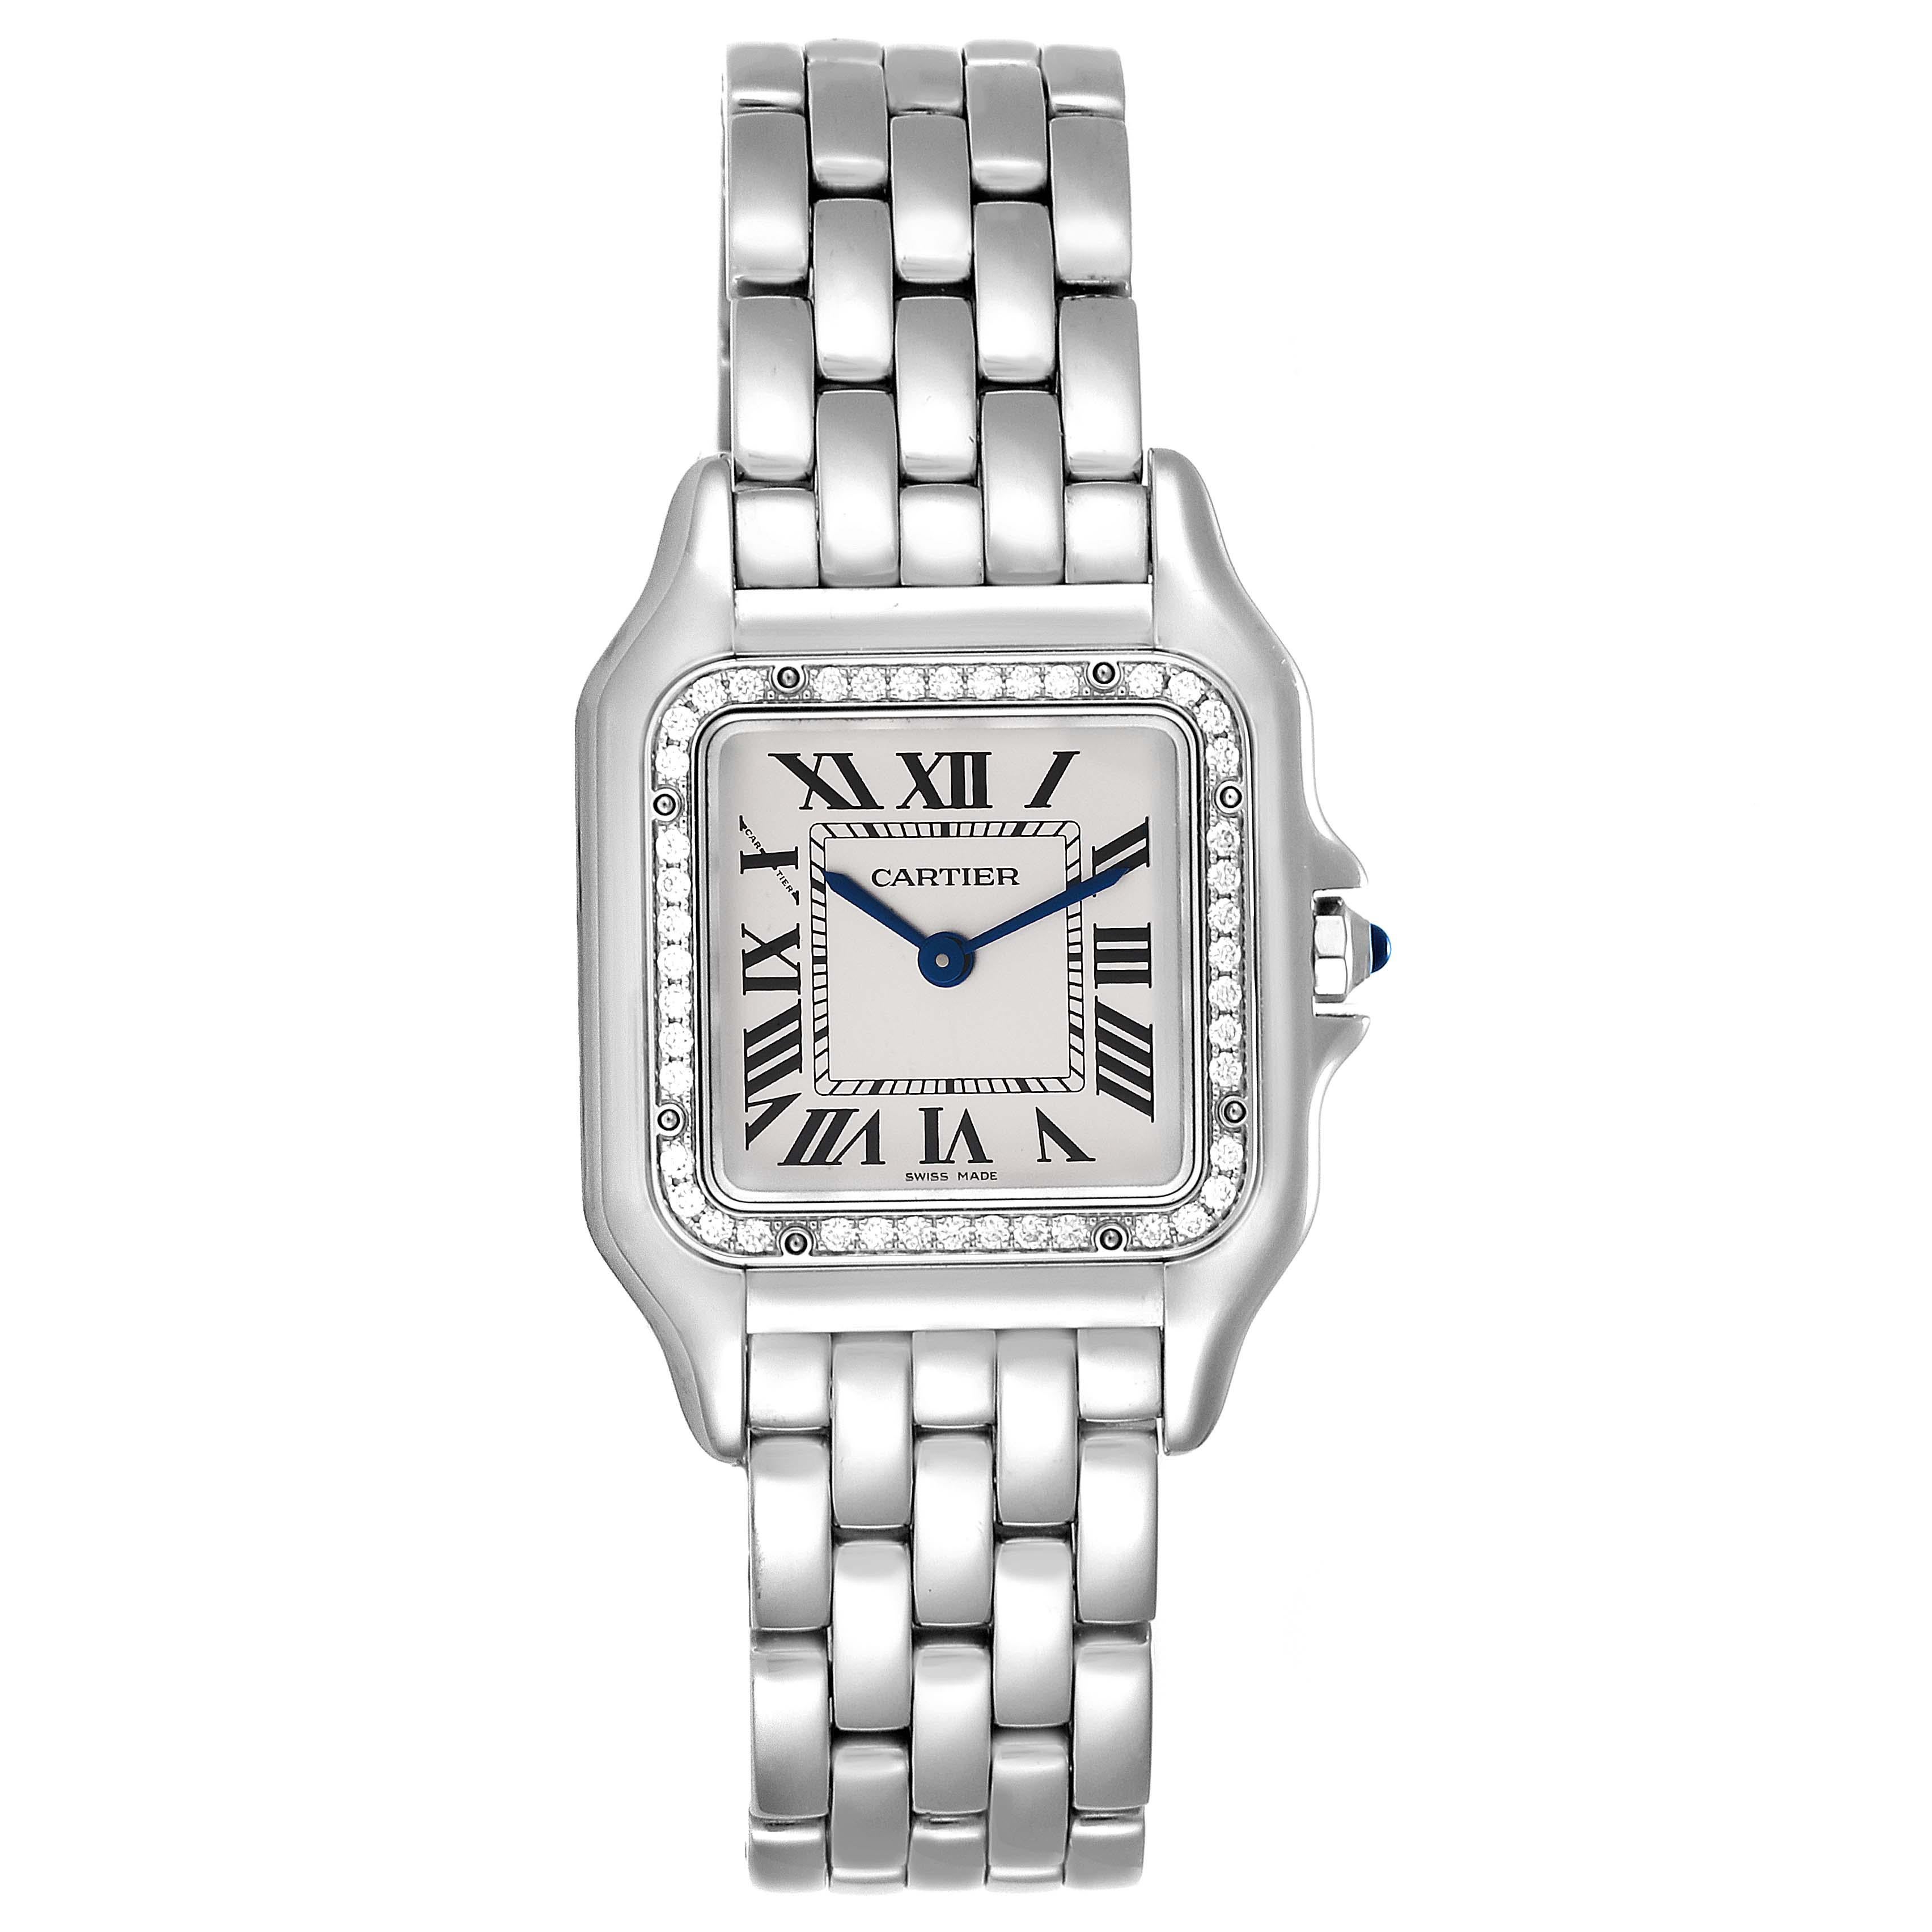 Cartier Panthere Medium Steel Diamond Ladies Watch W4PN0008. Quartz movement. Stainless steel case 27.0 x 37.0 mm. Octagonal crown set with blue spinnel cabochon. Original Cartier stainless steel diamond bezel. Scratch resistant sapphire crystal.